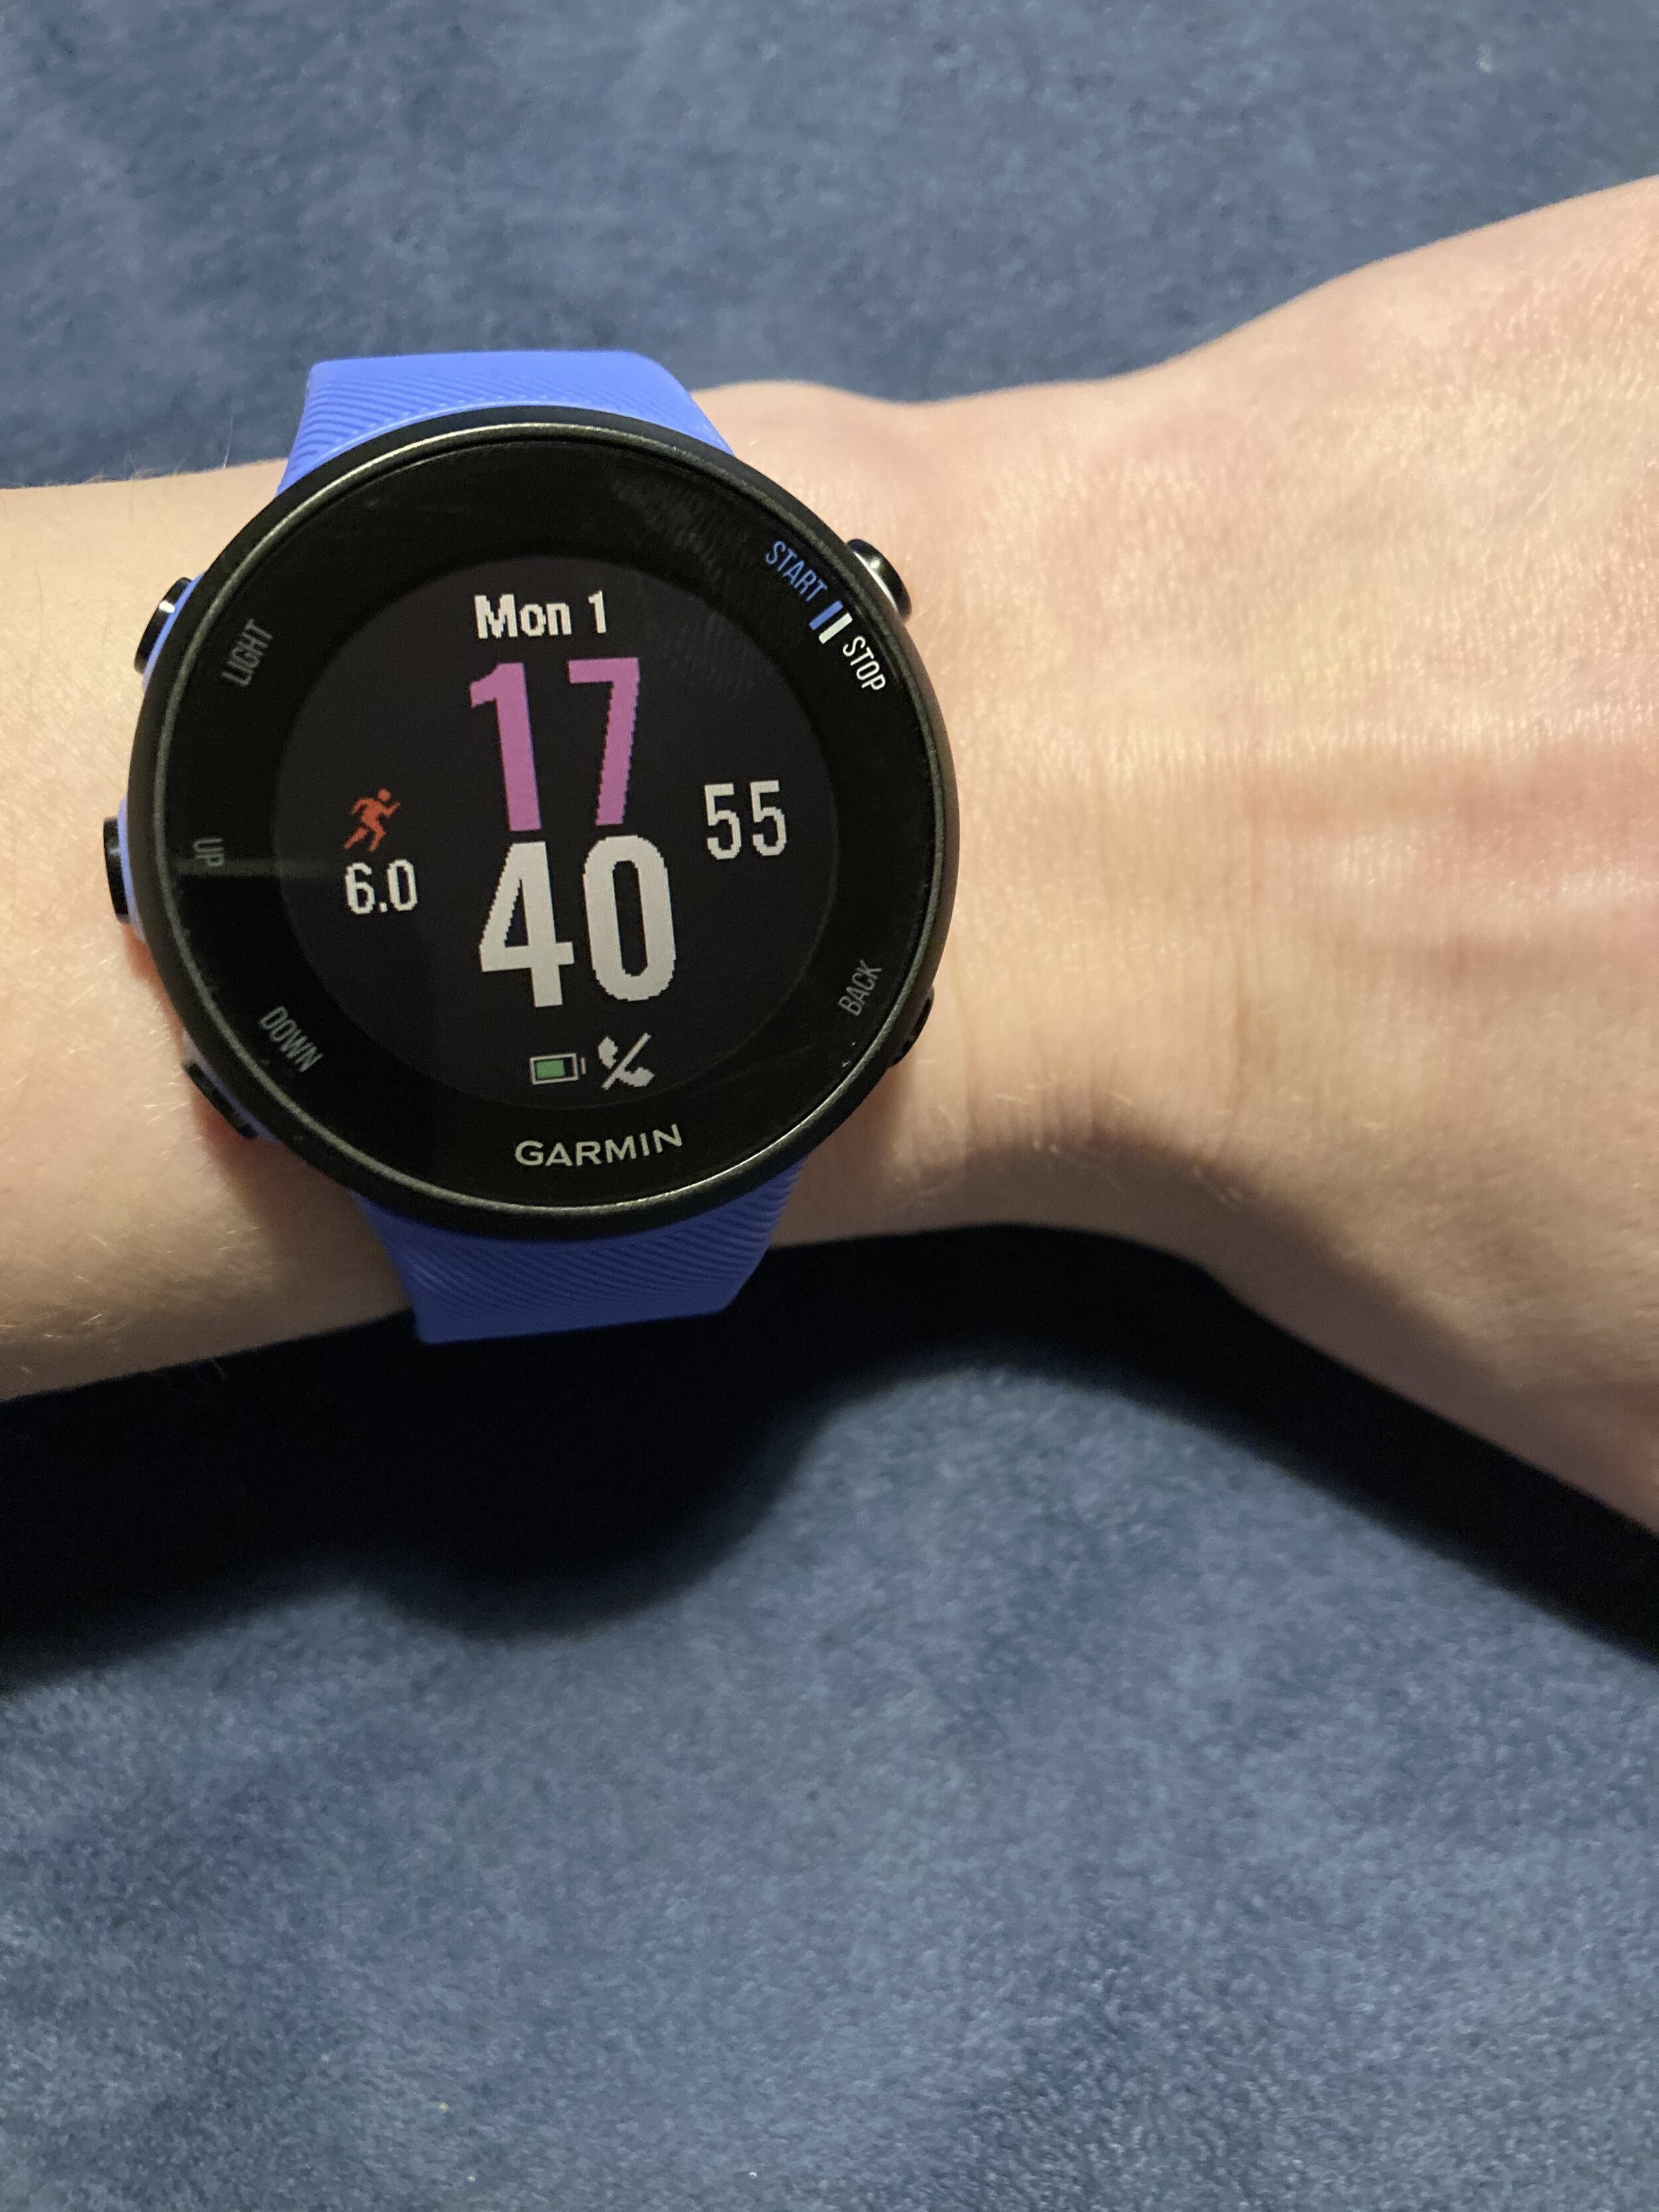 For me, this affordable, runner-friendly smart watch was an excellent investment.